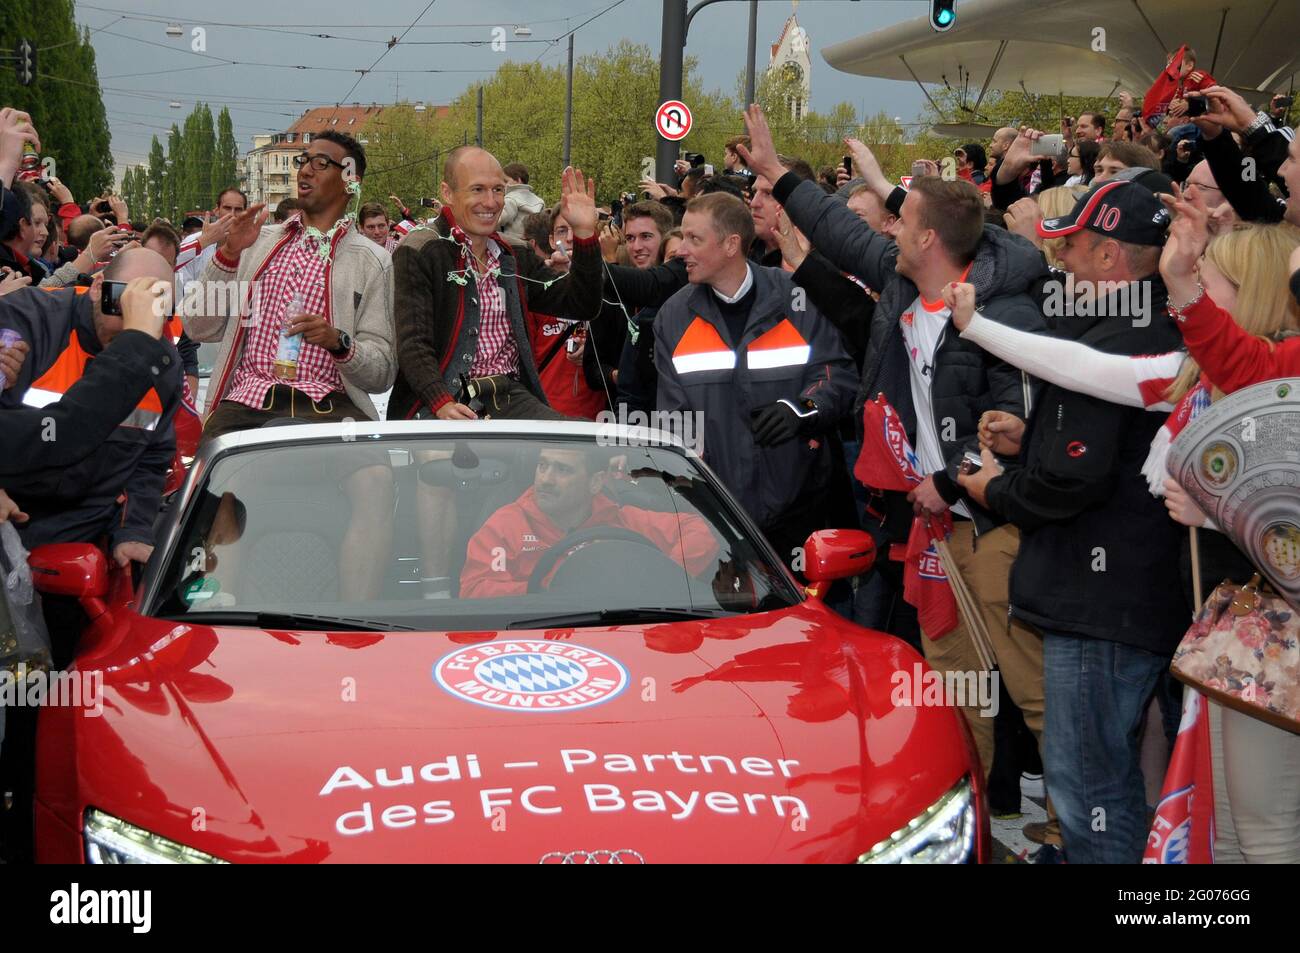 Jerome Boateng, Arjen Robben and FC Bayern Munich fans celebrate the win of the German Football Championship during a motorcade in Munich Stock Photo